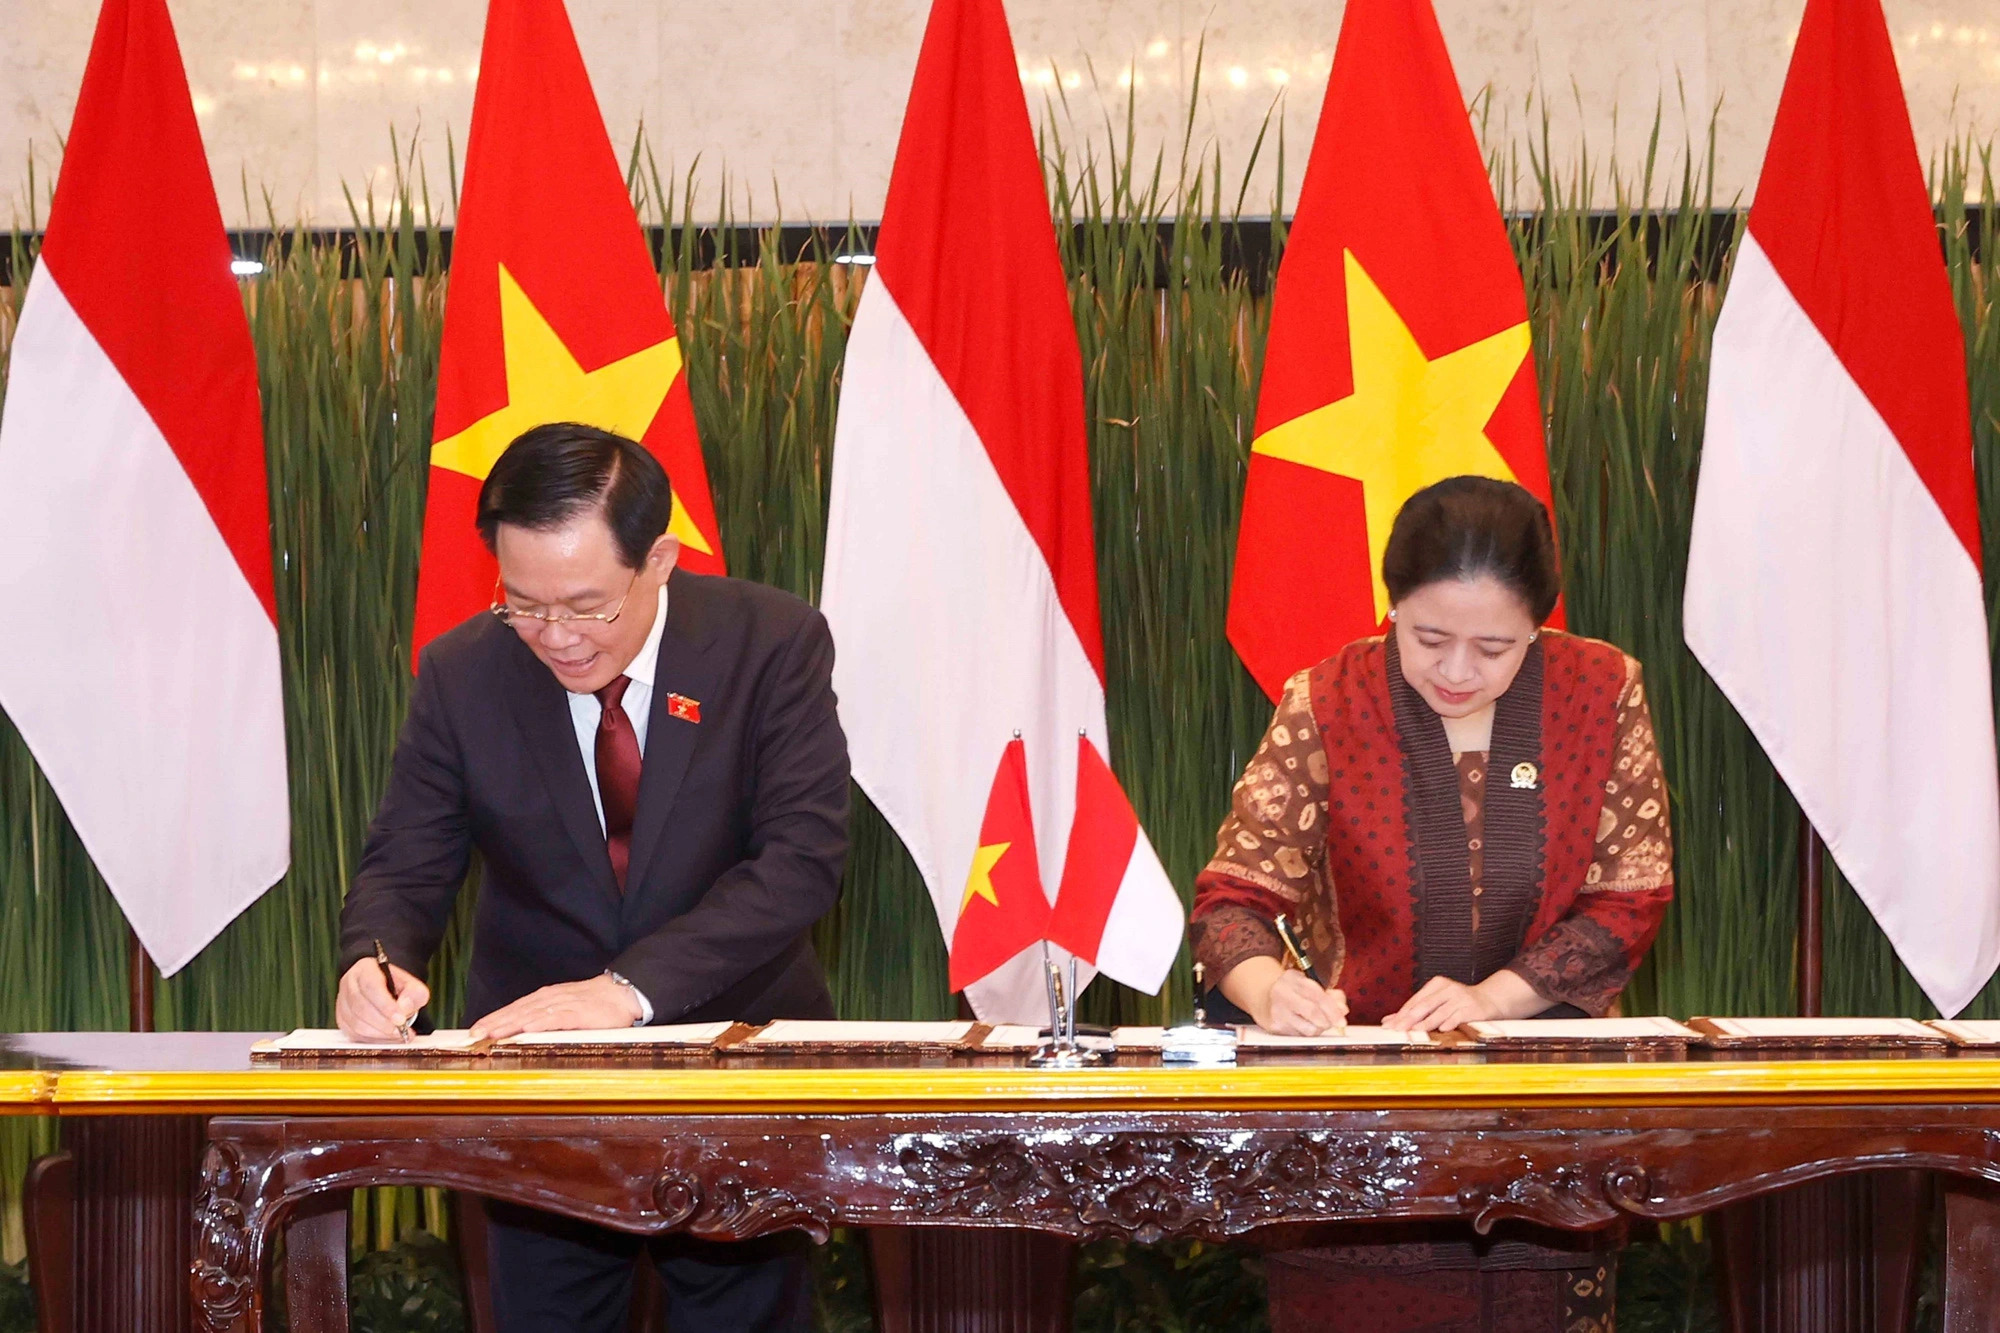 Vietnam’s National Assembly Chairman Vuong Dinh Hue (L) and Indonesia’s Speaker of the People’s Representative Council Puan Maharani sign a cooperation deal between the two legislatures of the two countries. Photo: Vietnam News Agency